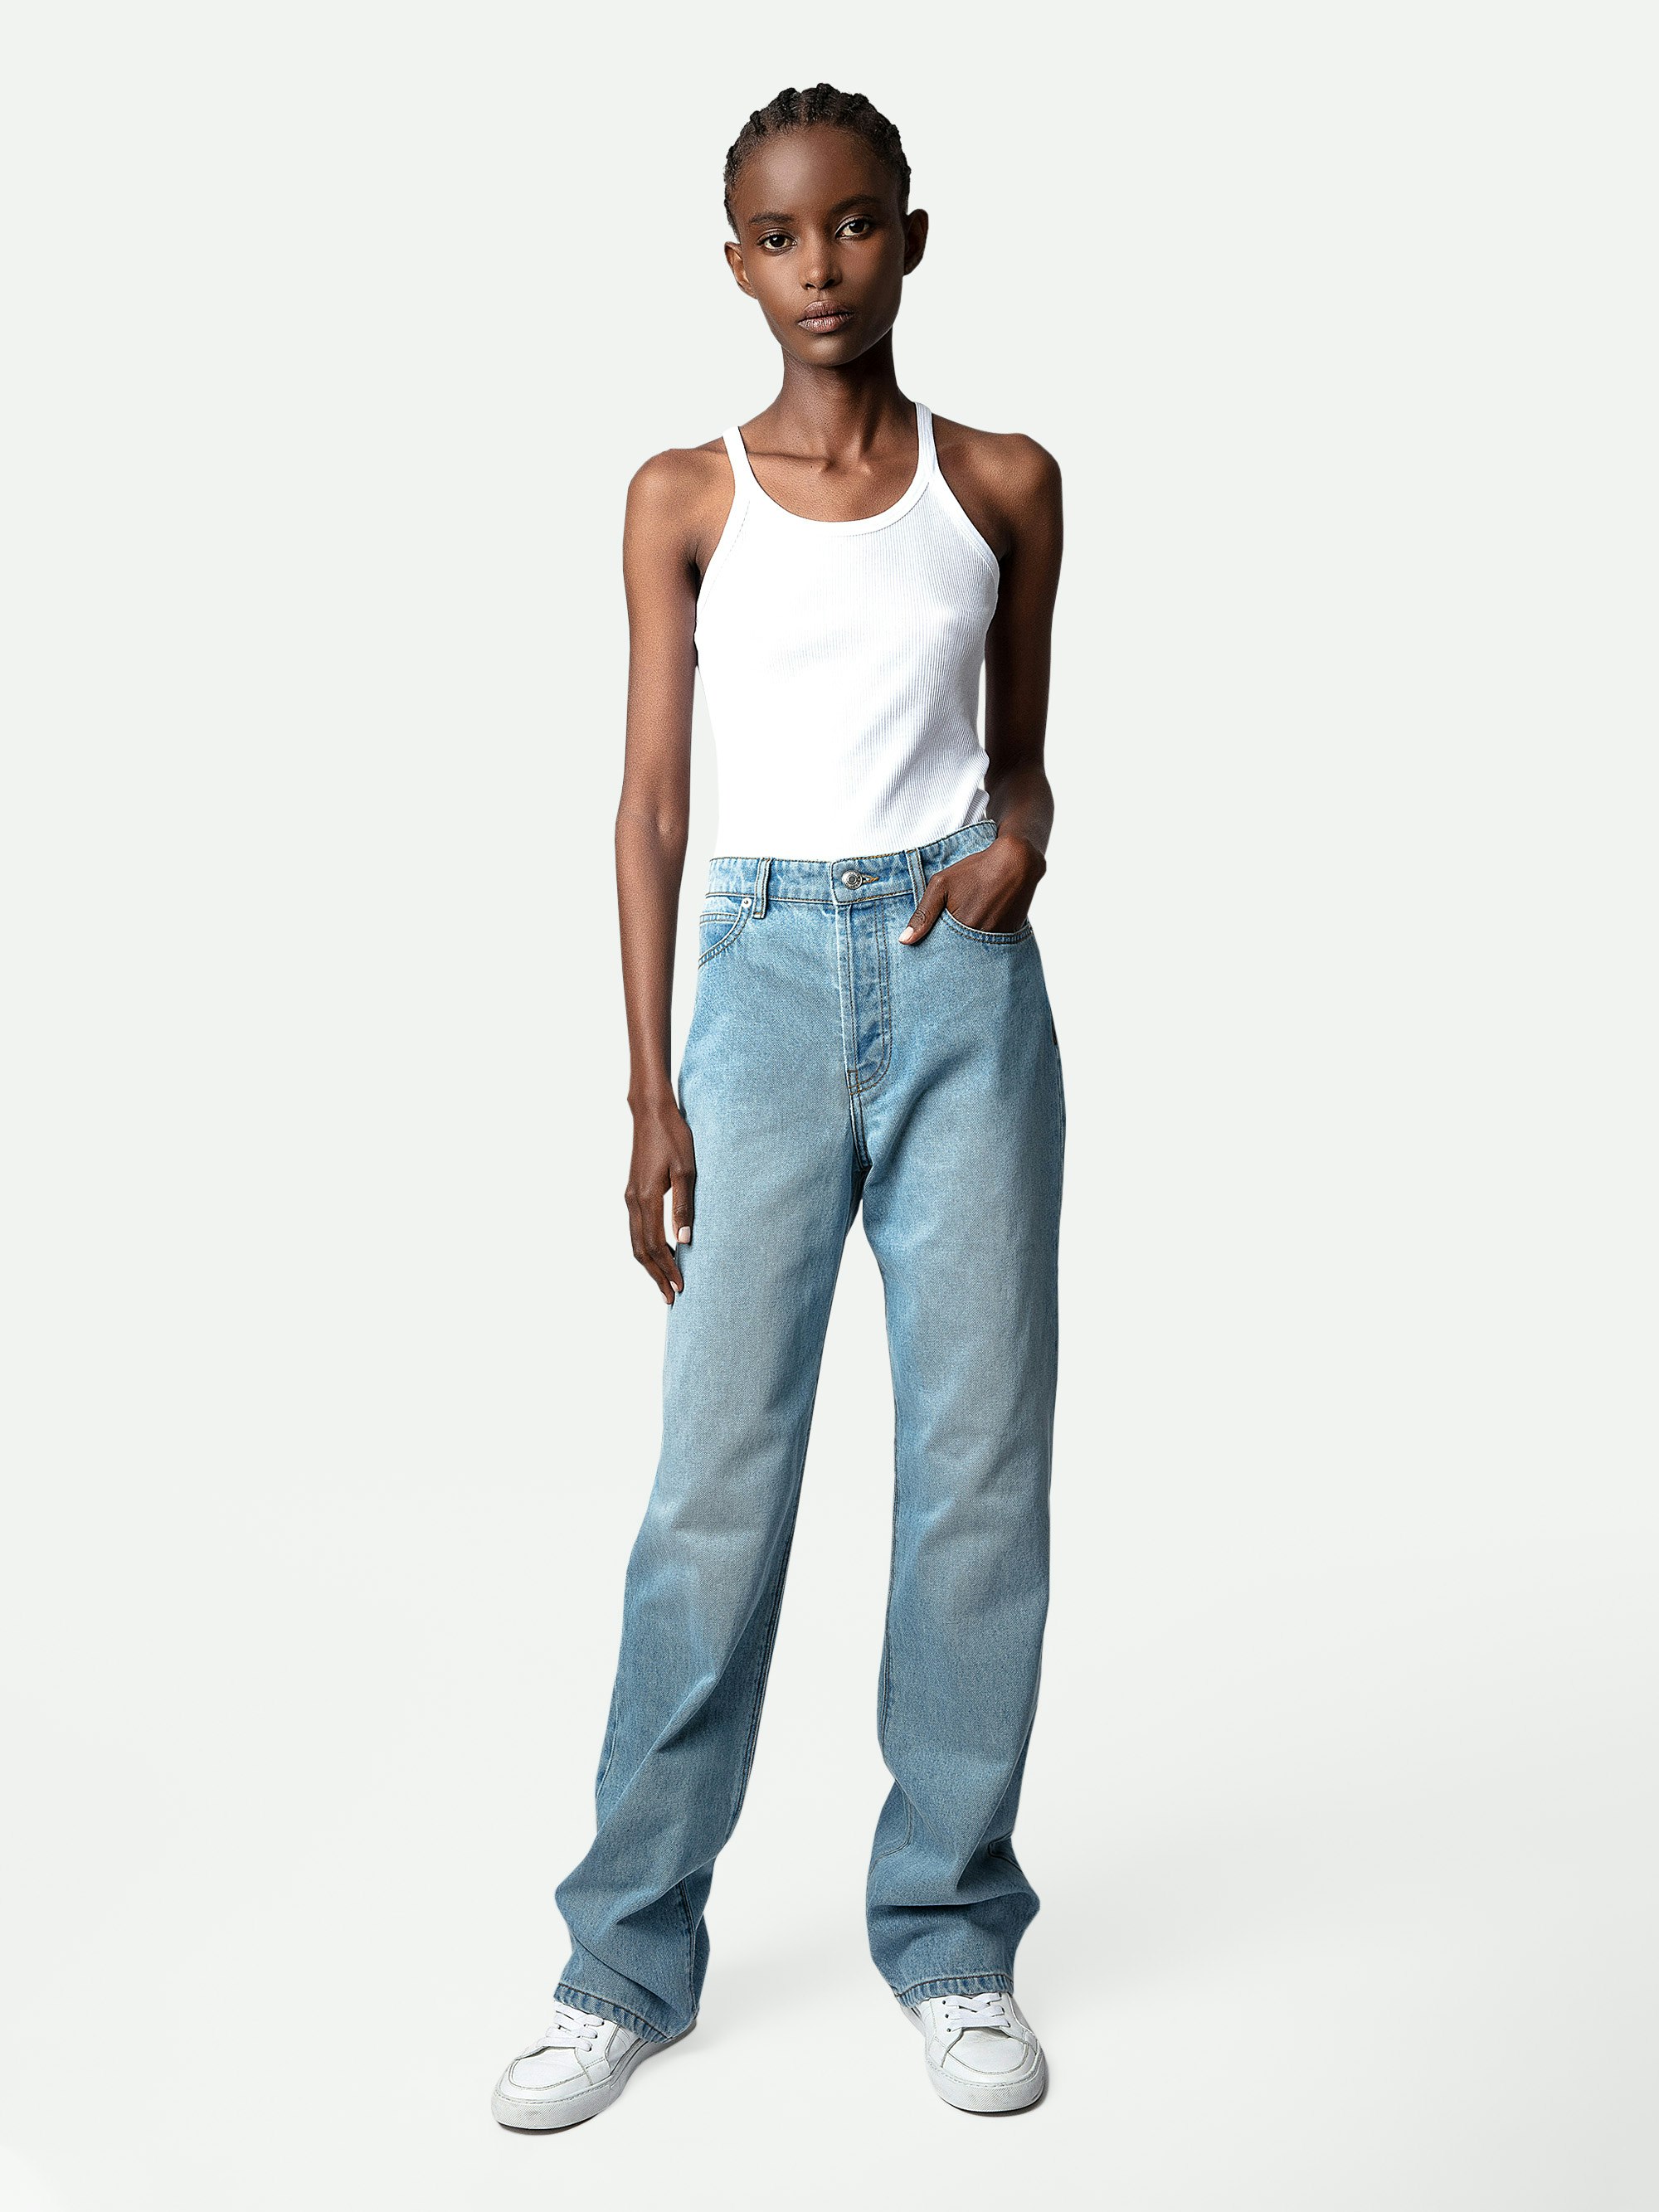 Evy Jeans - Women’s faded denim flared jeans